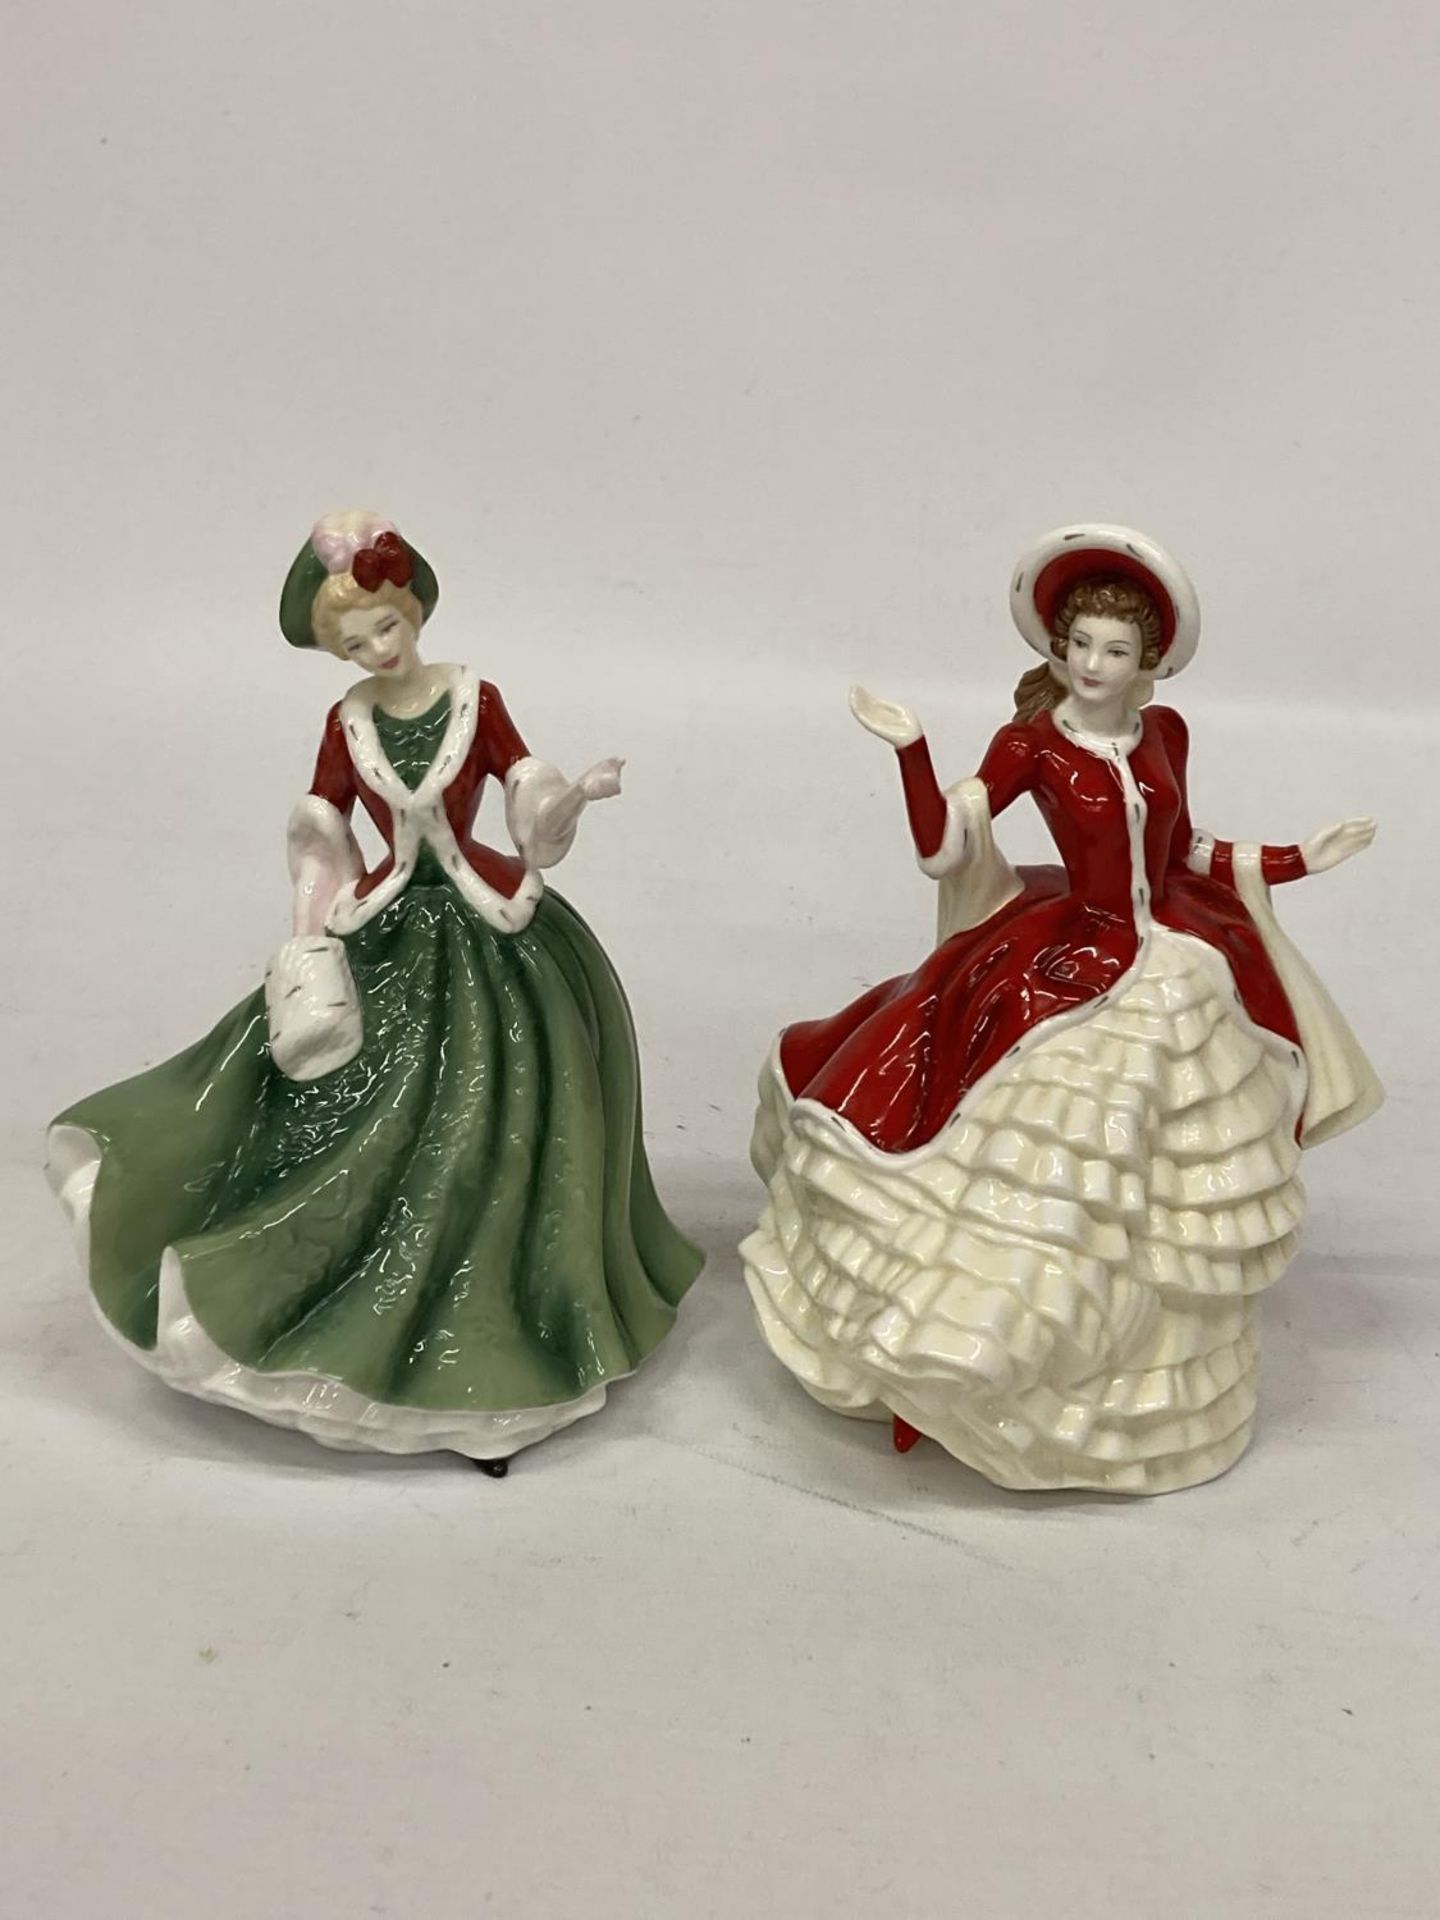 TWO ROYAL DOULTON FIGURINES FROM THE PRETTY LADIES COLLECTION BOTH TITLED "CHRISTMAS DAY"